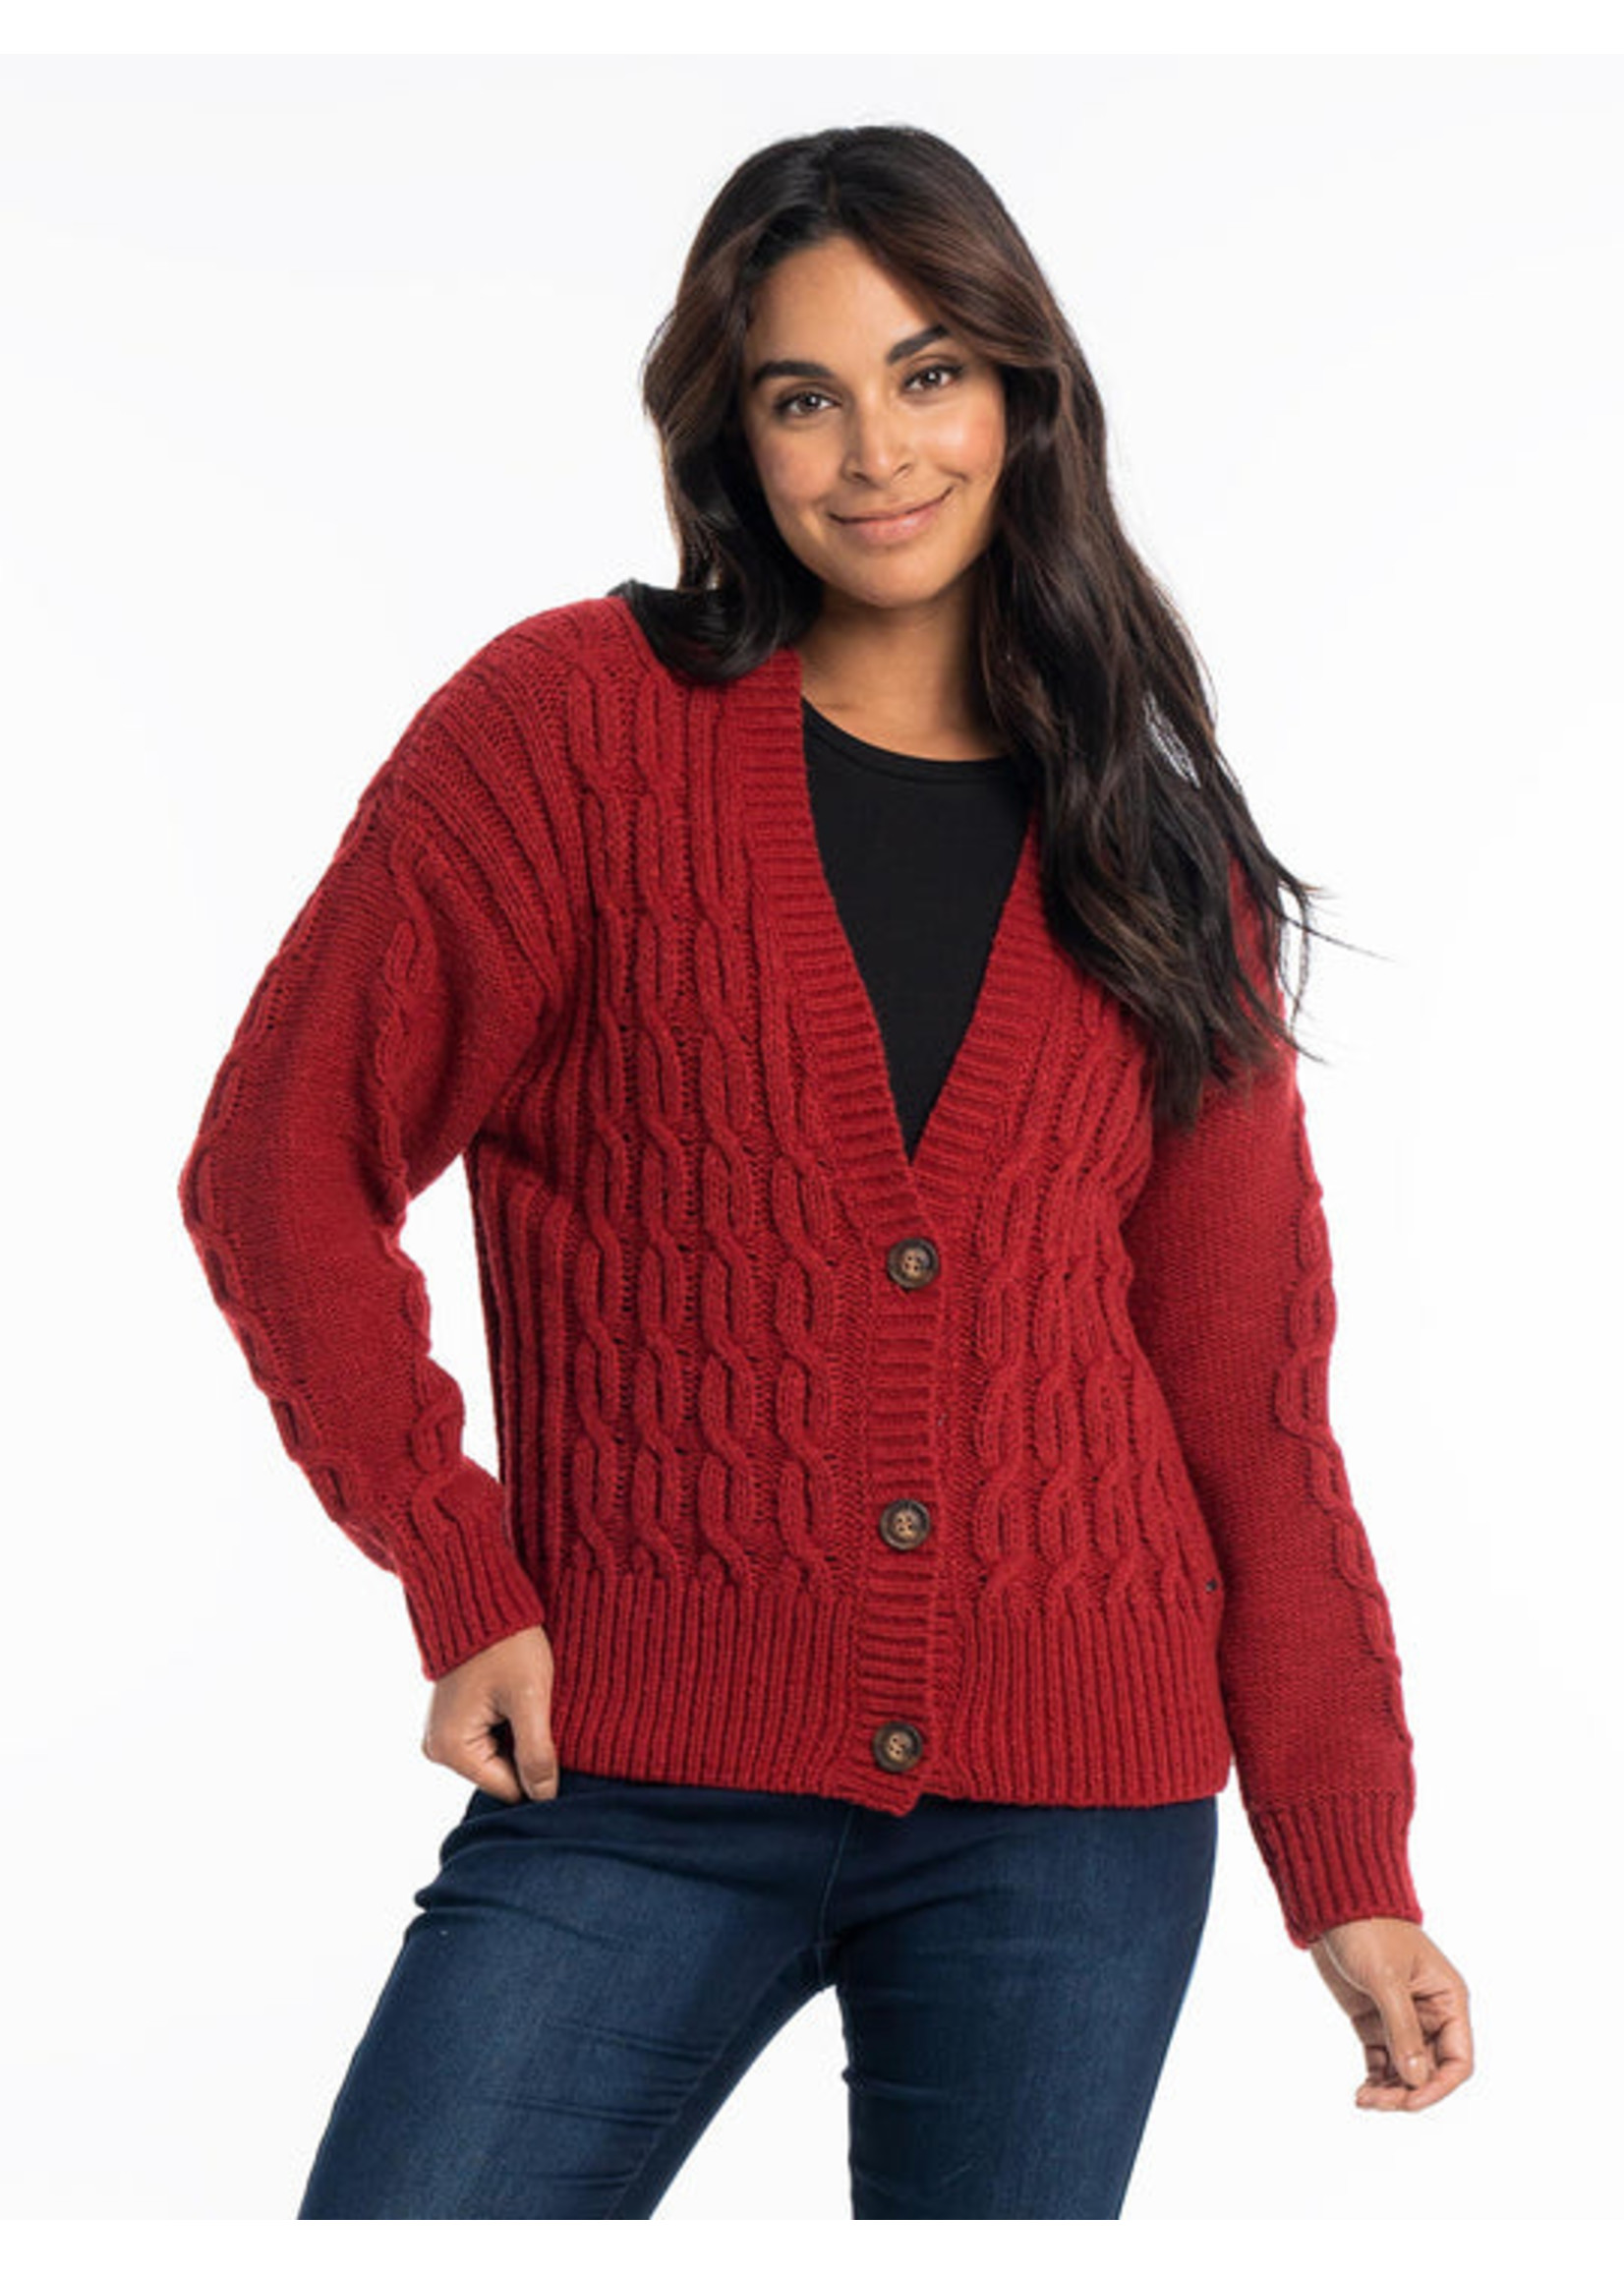 LOIS JEANS & JACKETS Woman's Cardigan Sweater Audrina Deep Red